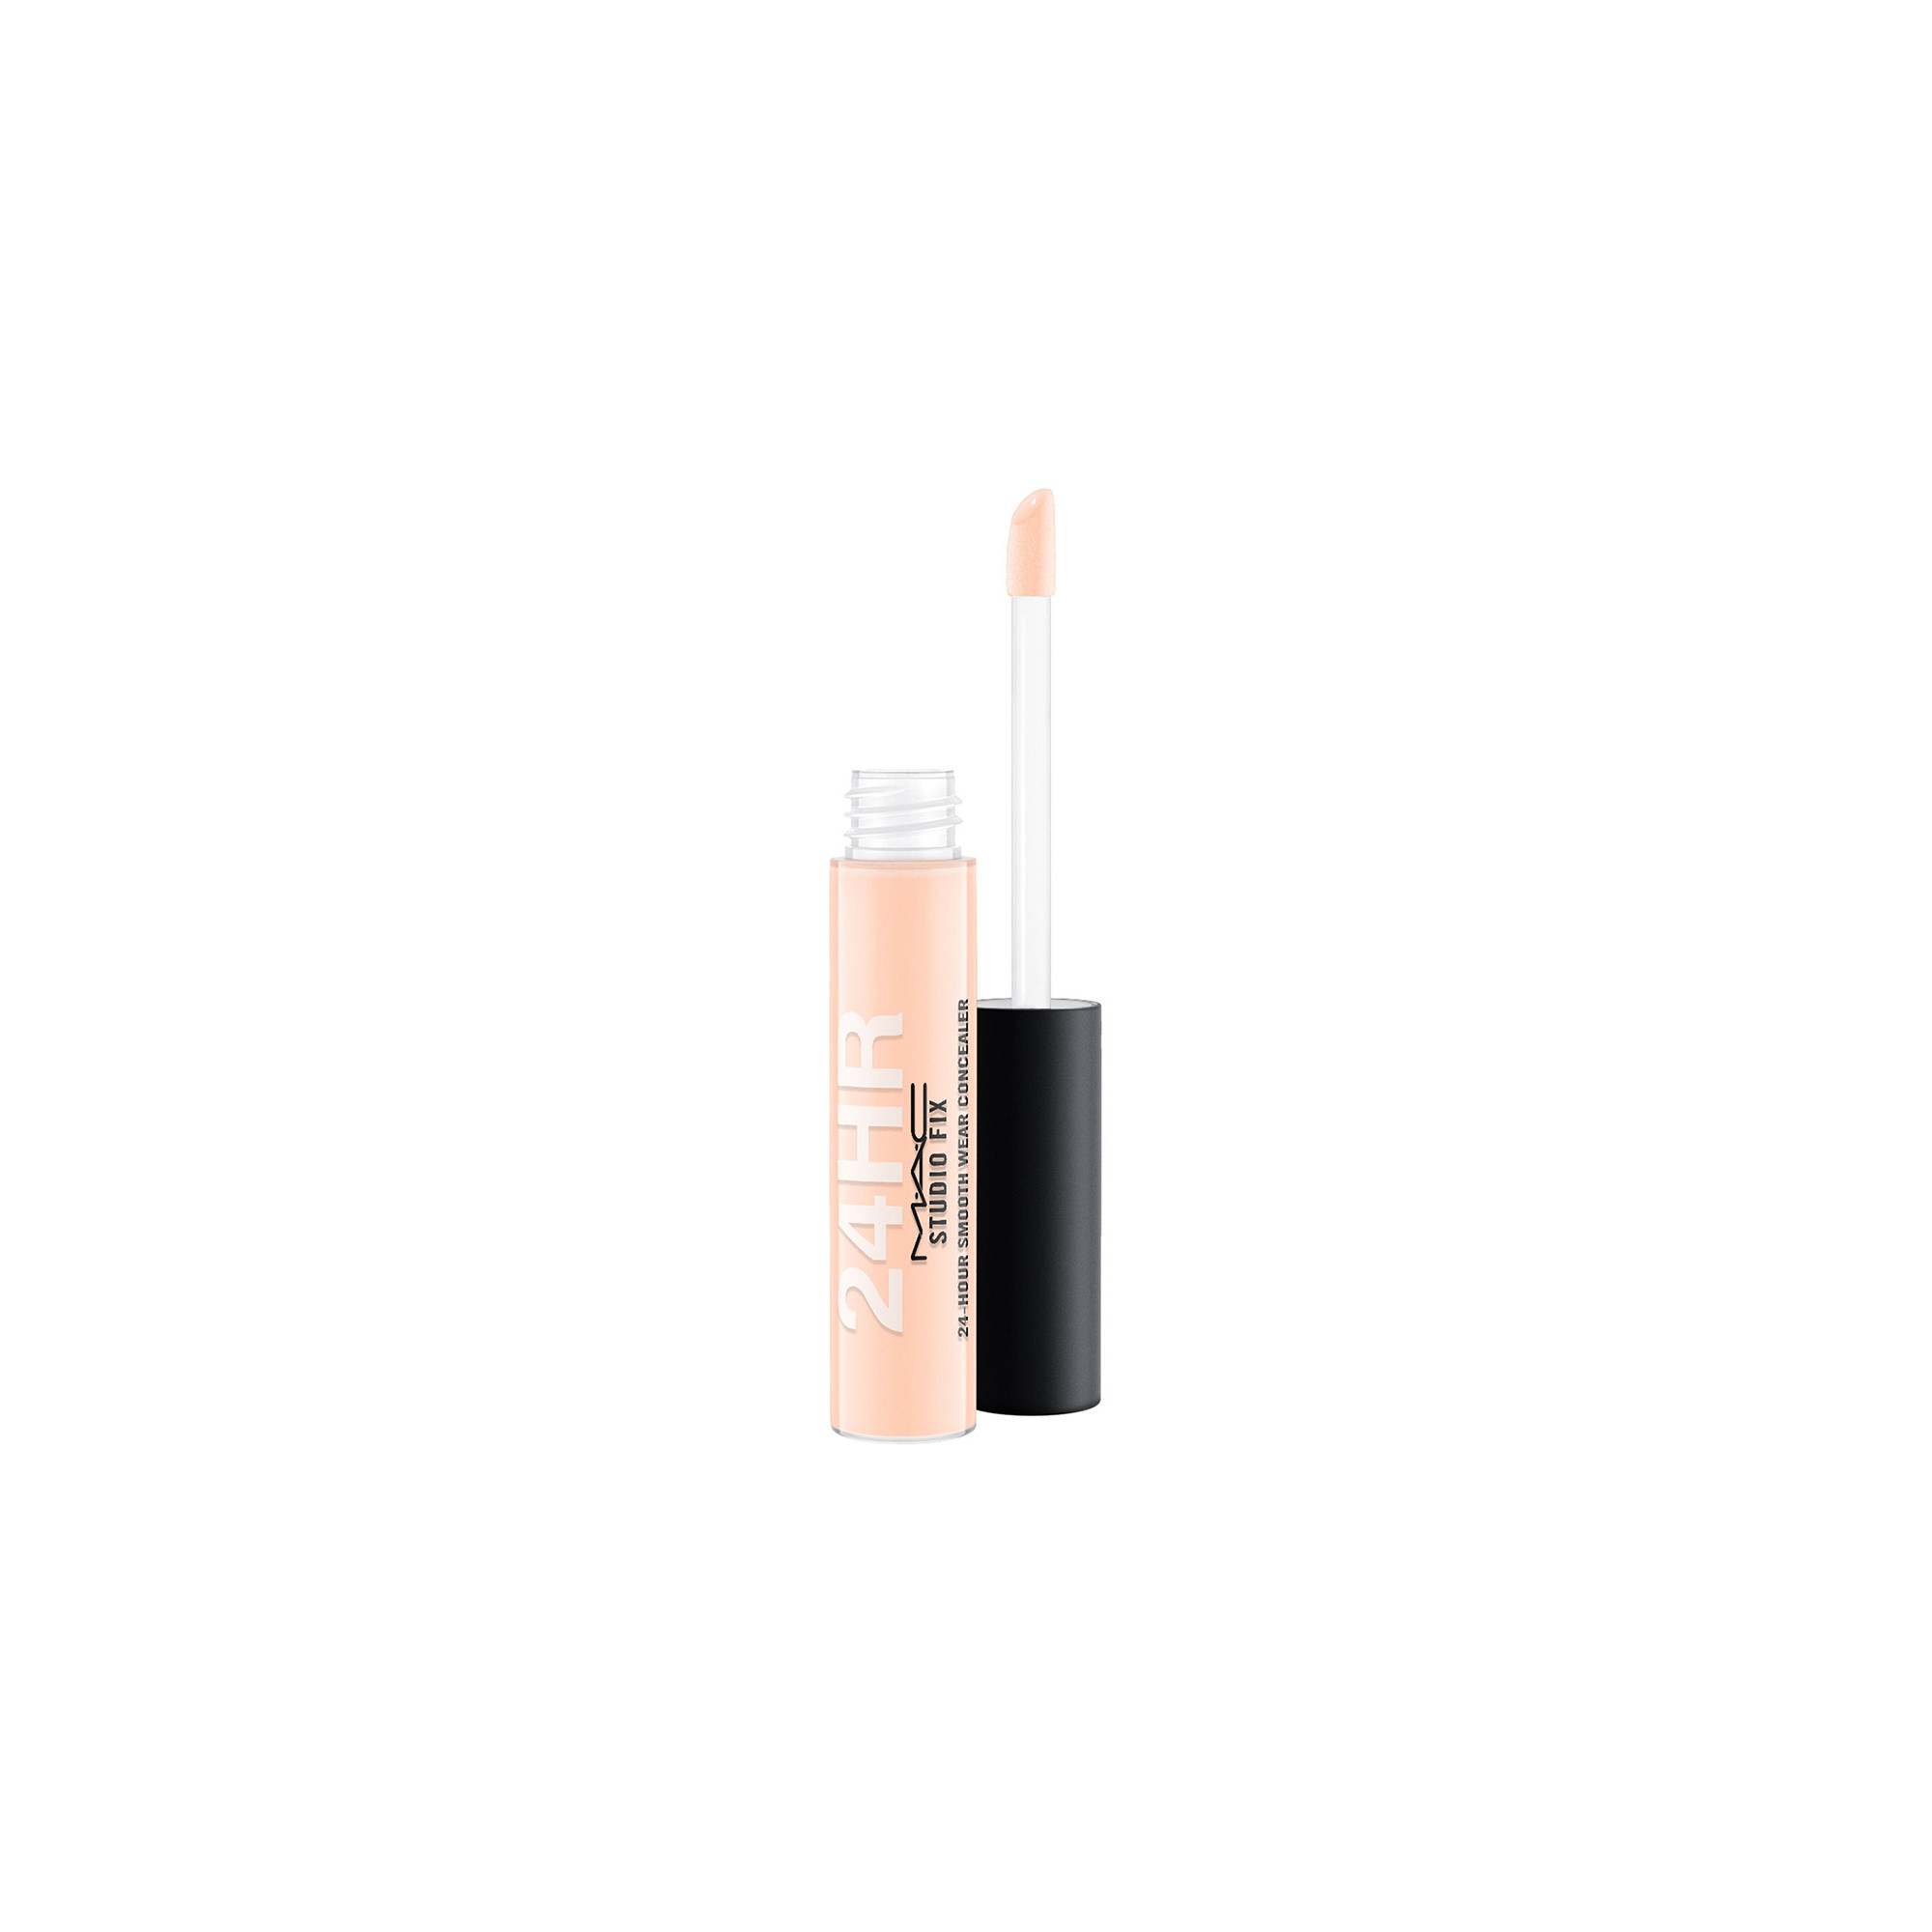 Studio Fix 24H Concealer - NW20, NW20, large